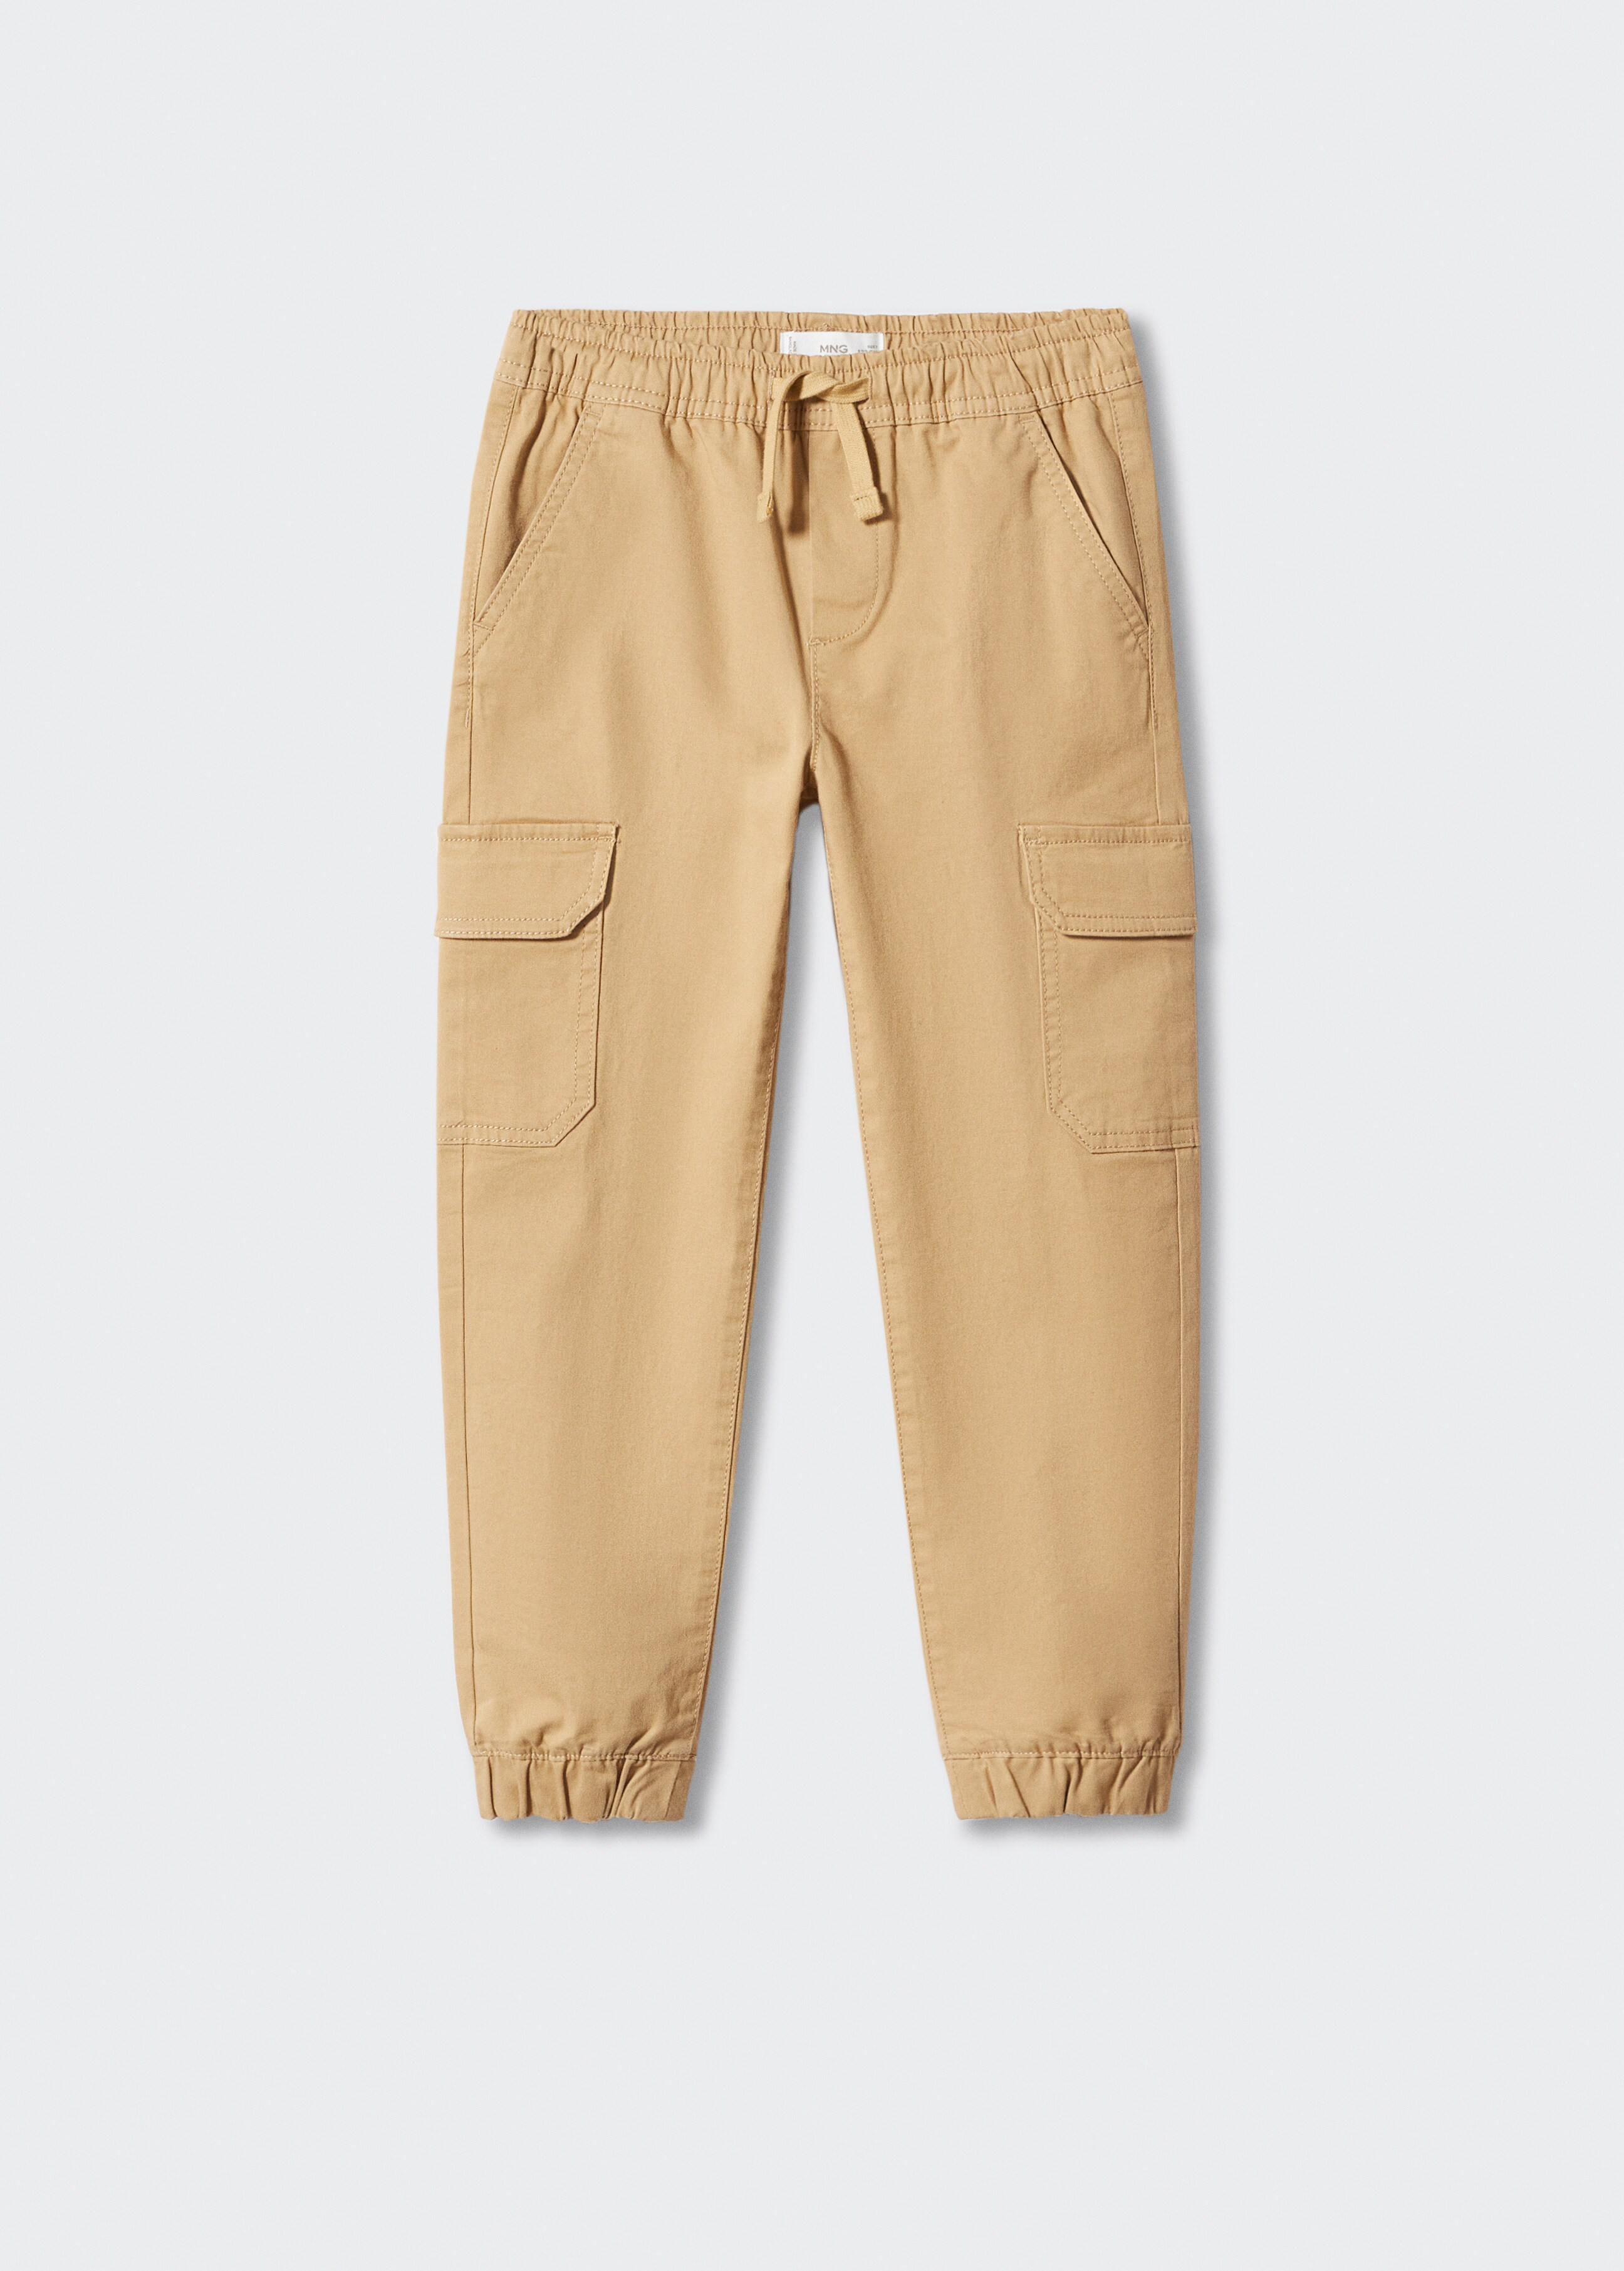 Pocket jogger trousers - Article without model